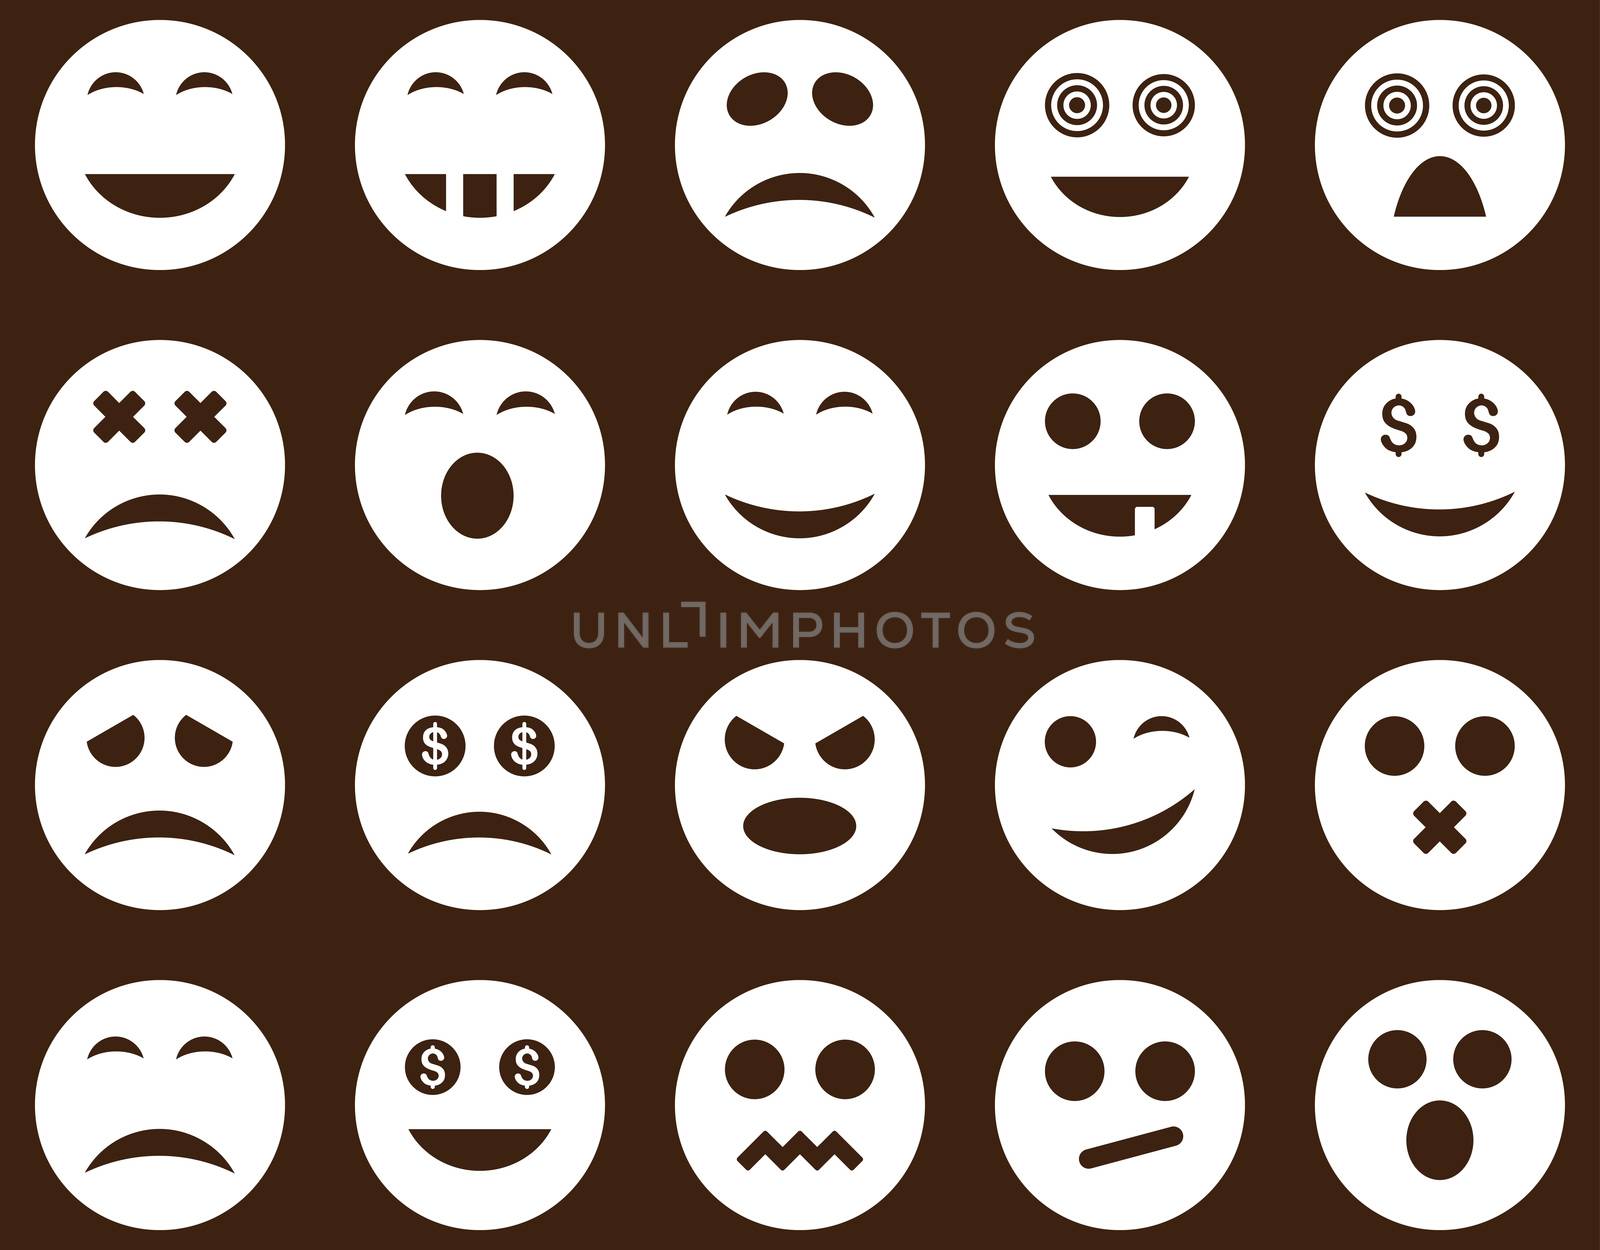 Smile and emotion icons. Glyph set style is flat images, white symbols, isolated on a brown background.